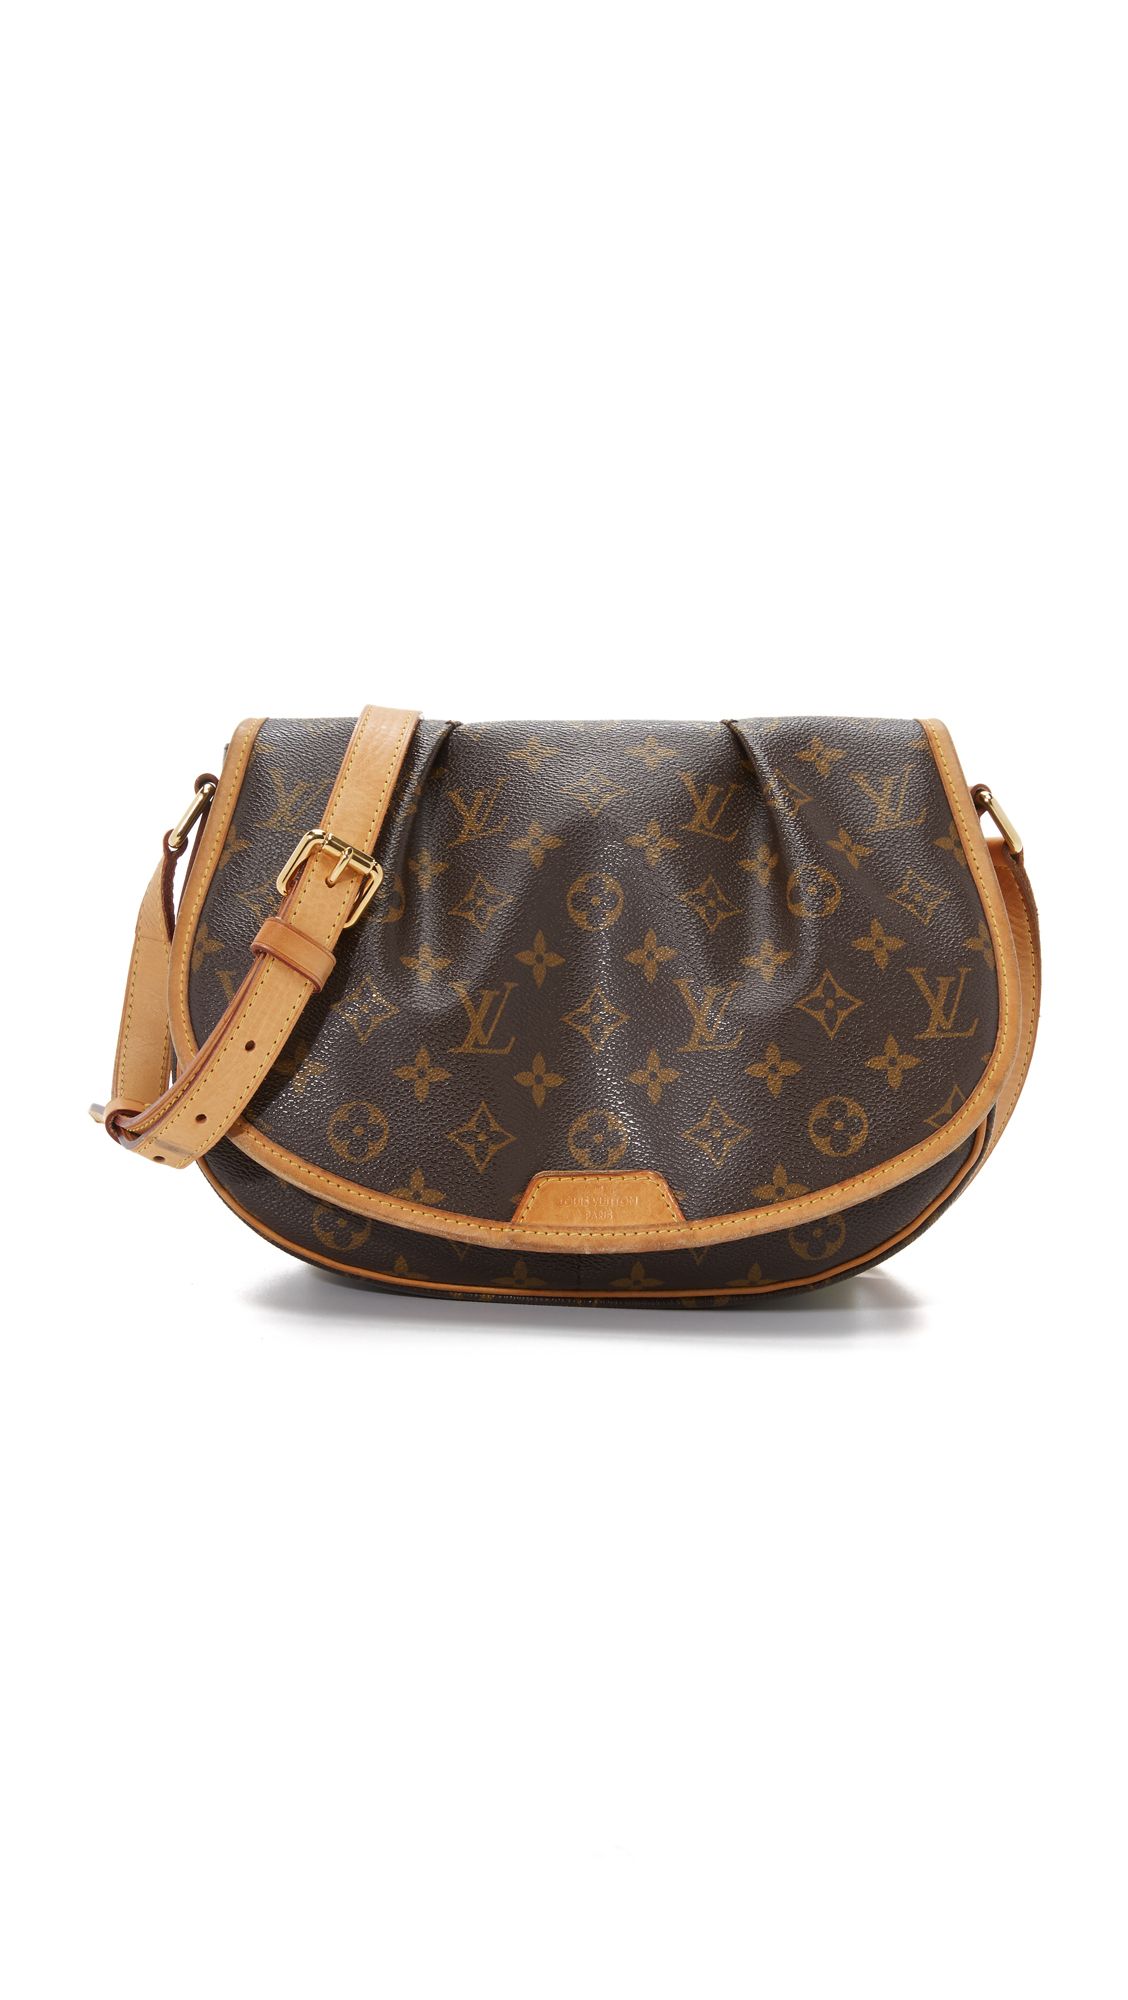 What Goes Around Comes Around Louis Vuitton Monogram Menilmontant Pm Bag (Previously Owned) - Brown | Shopbop